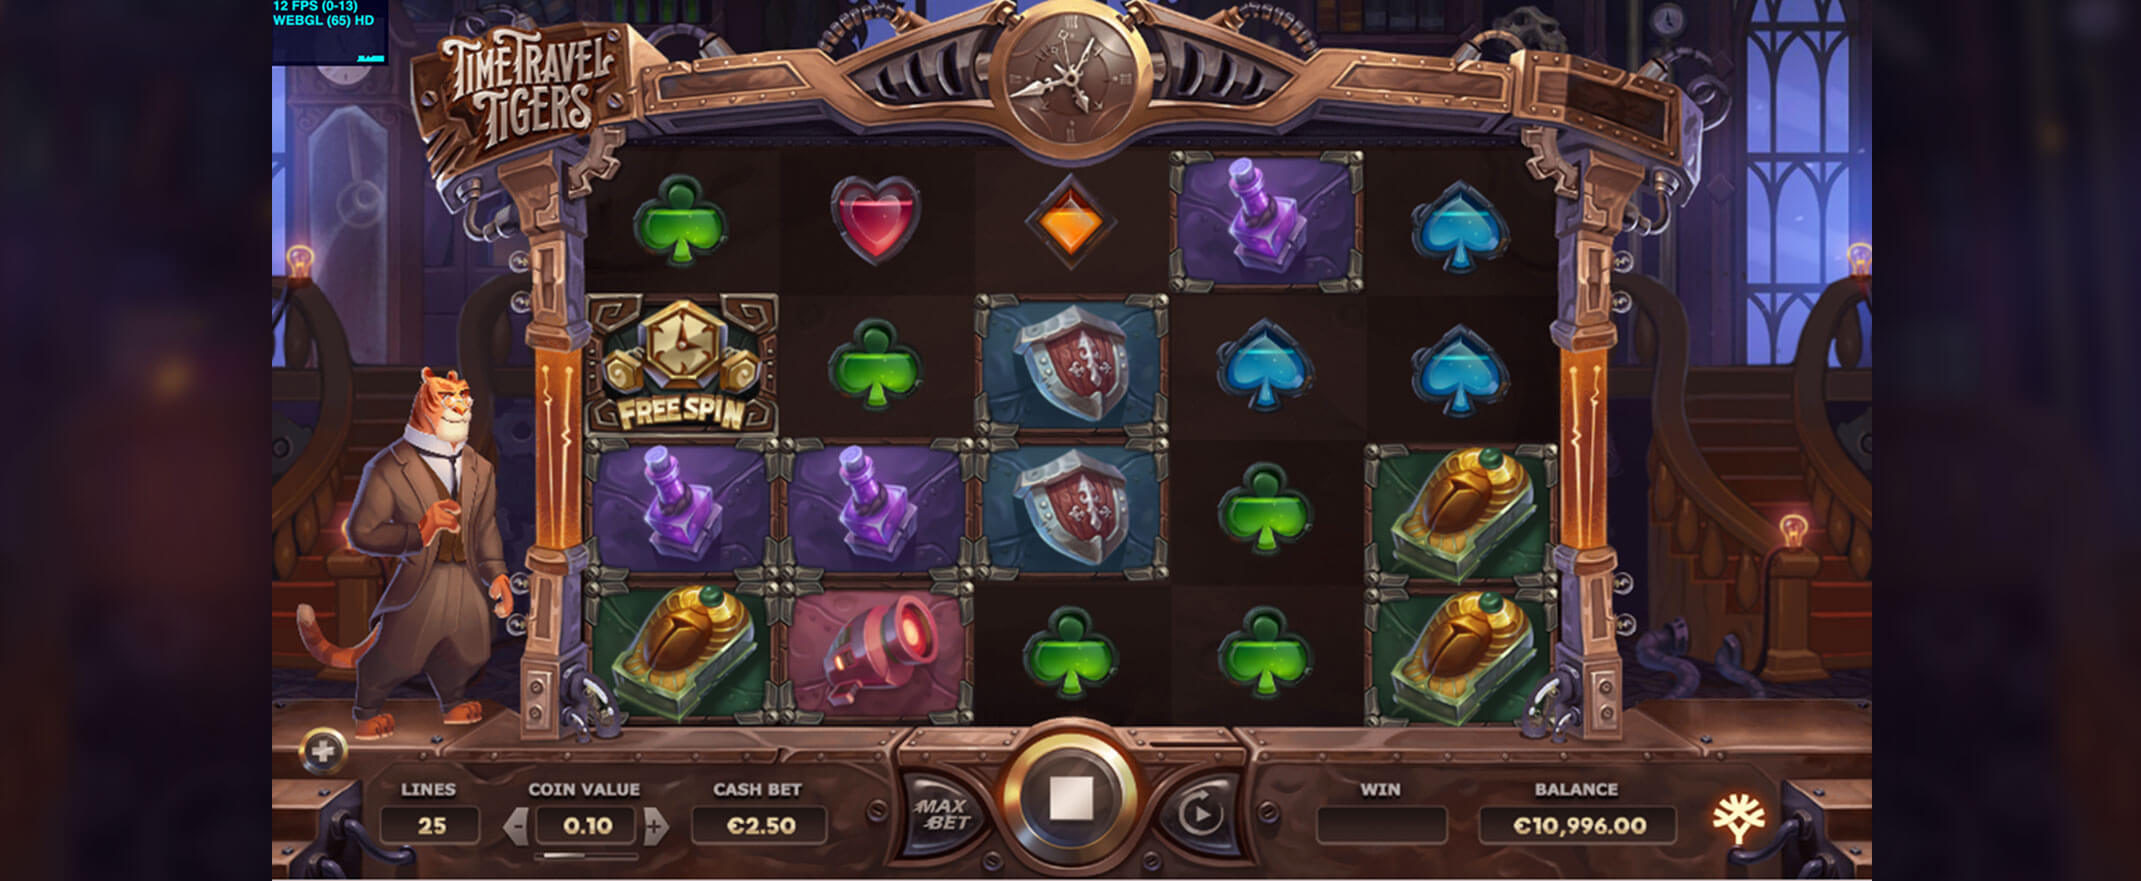 Time Travel Tigers slot by Yggdrasil - a screenshot of the slot reels